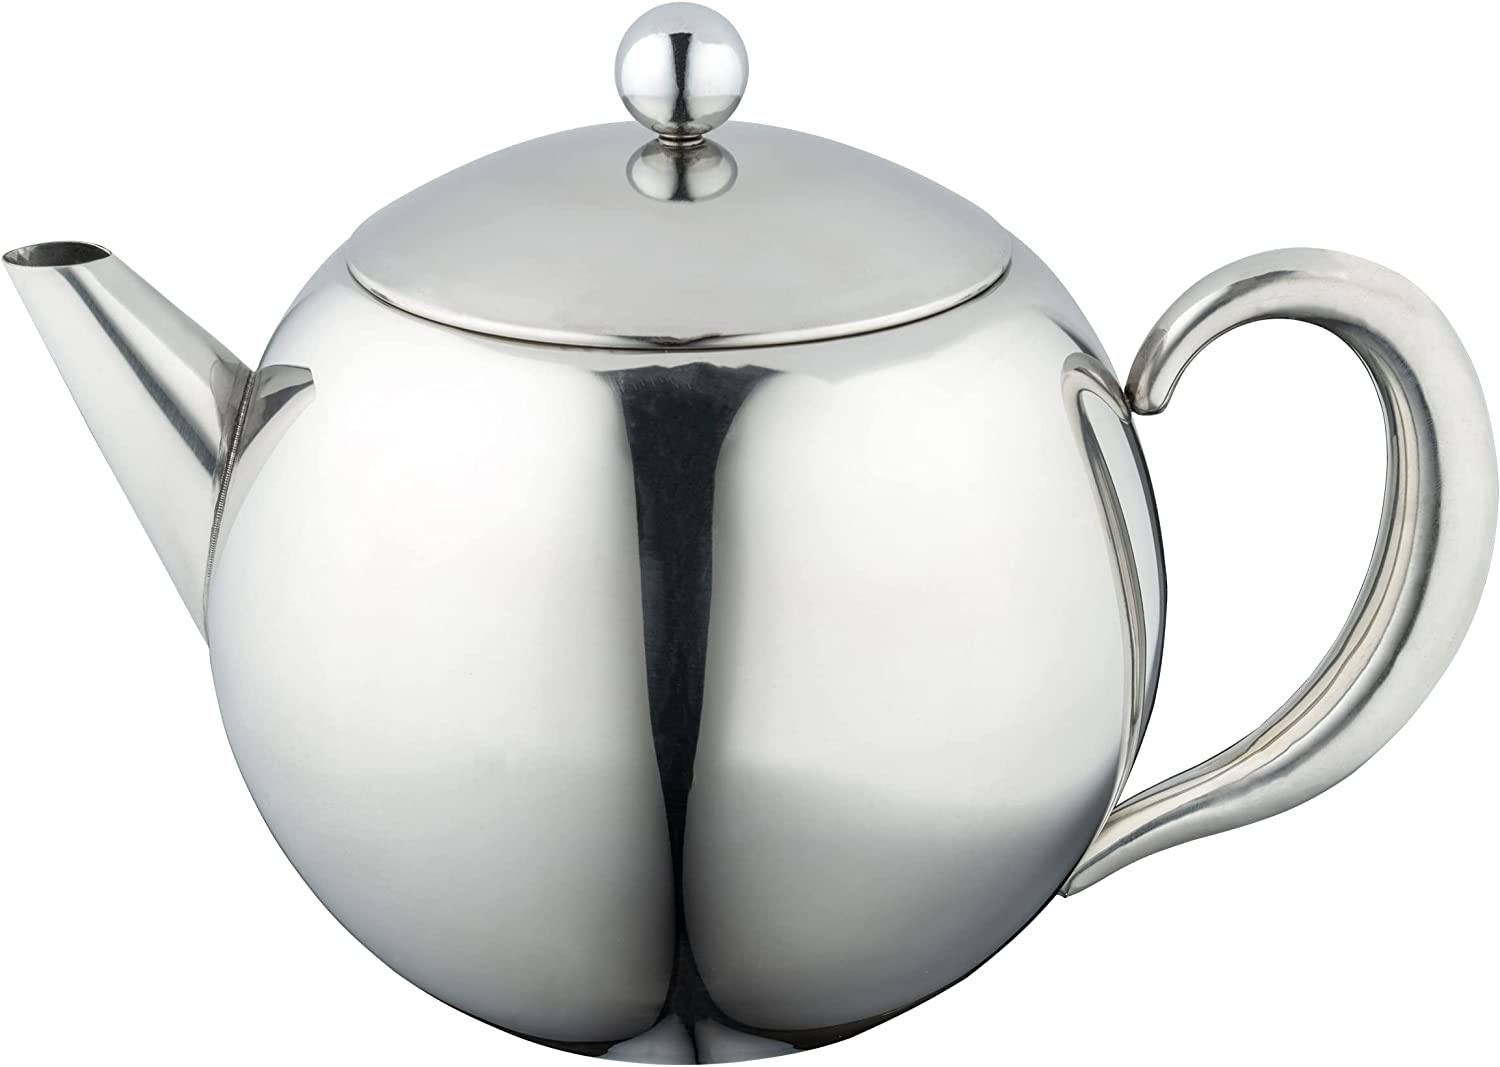 Grunwerg Rondeo Deluxe Stainless Steel Teapot & Infuser - 1.0L RT -035X